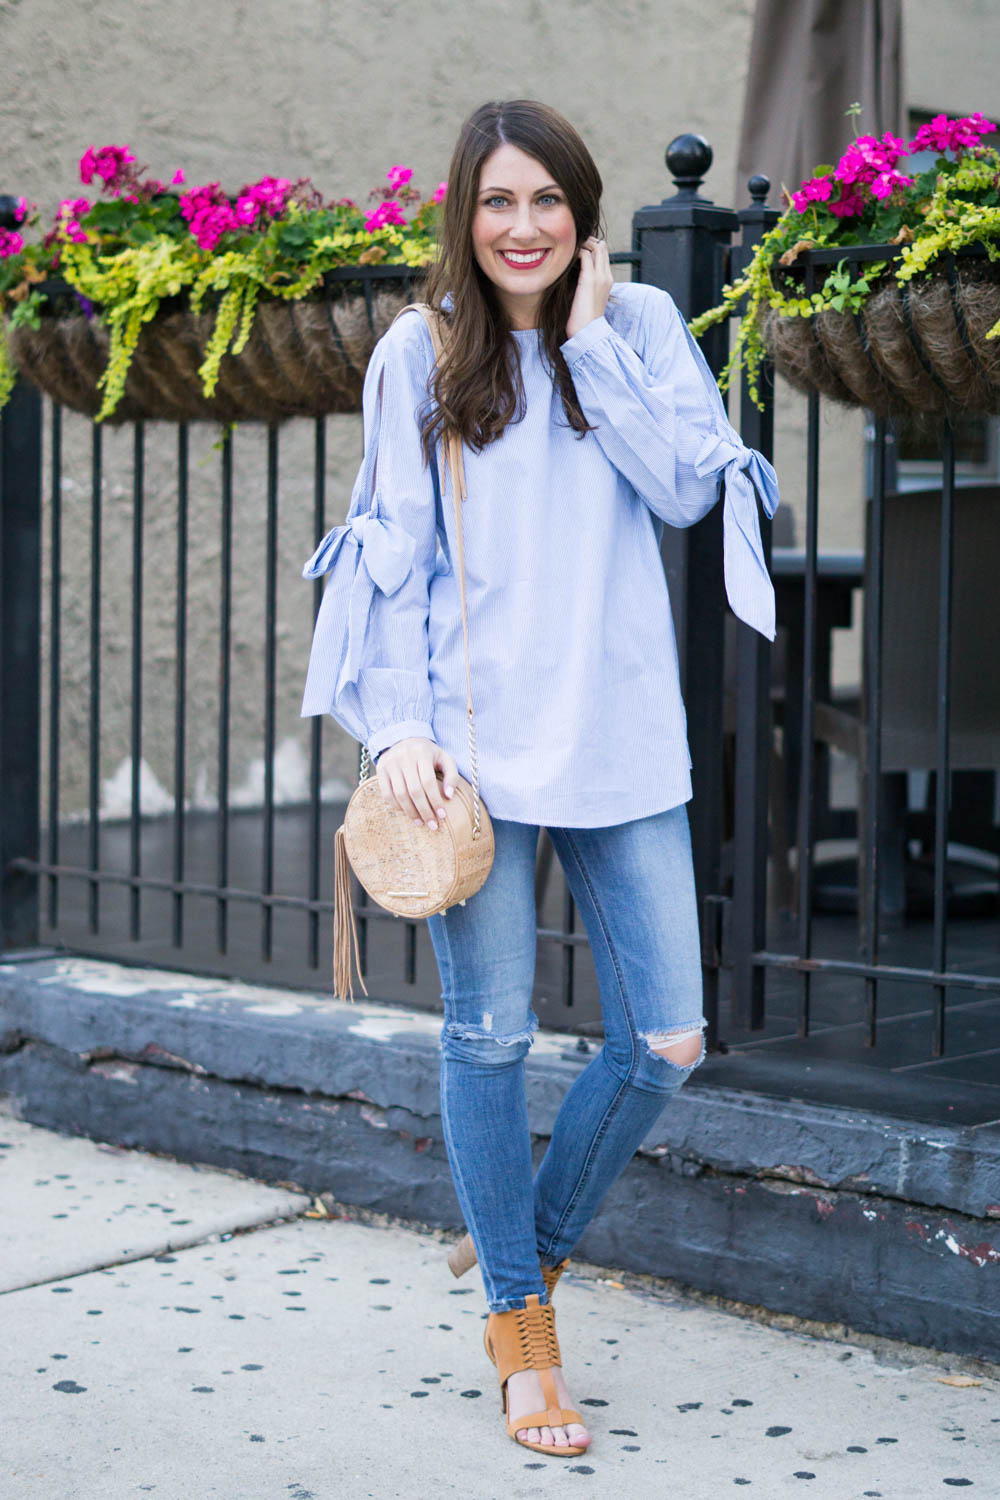 Transitioning Your Outfit From Summer to Fall